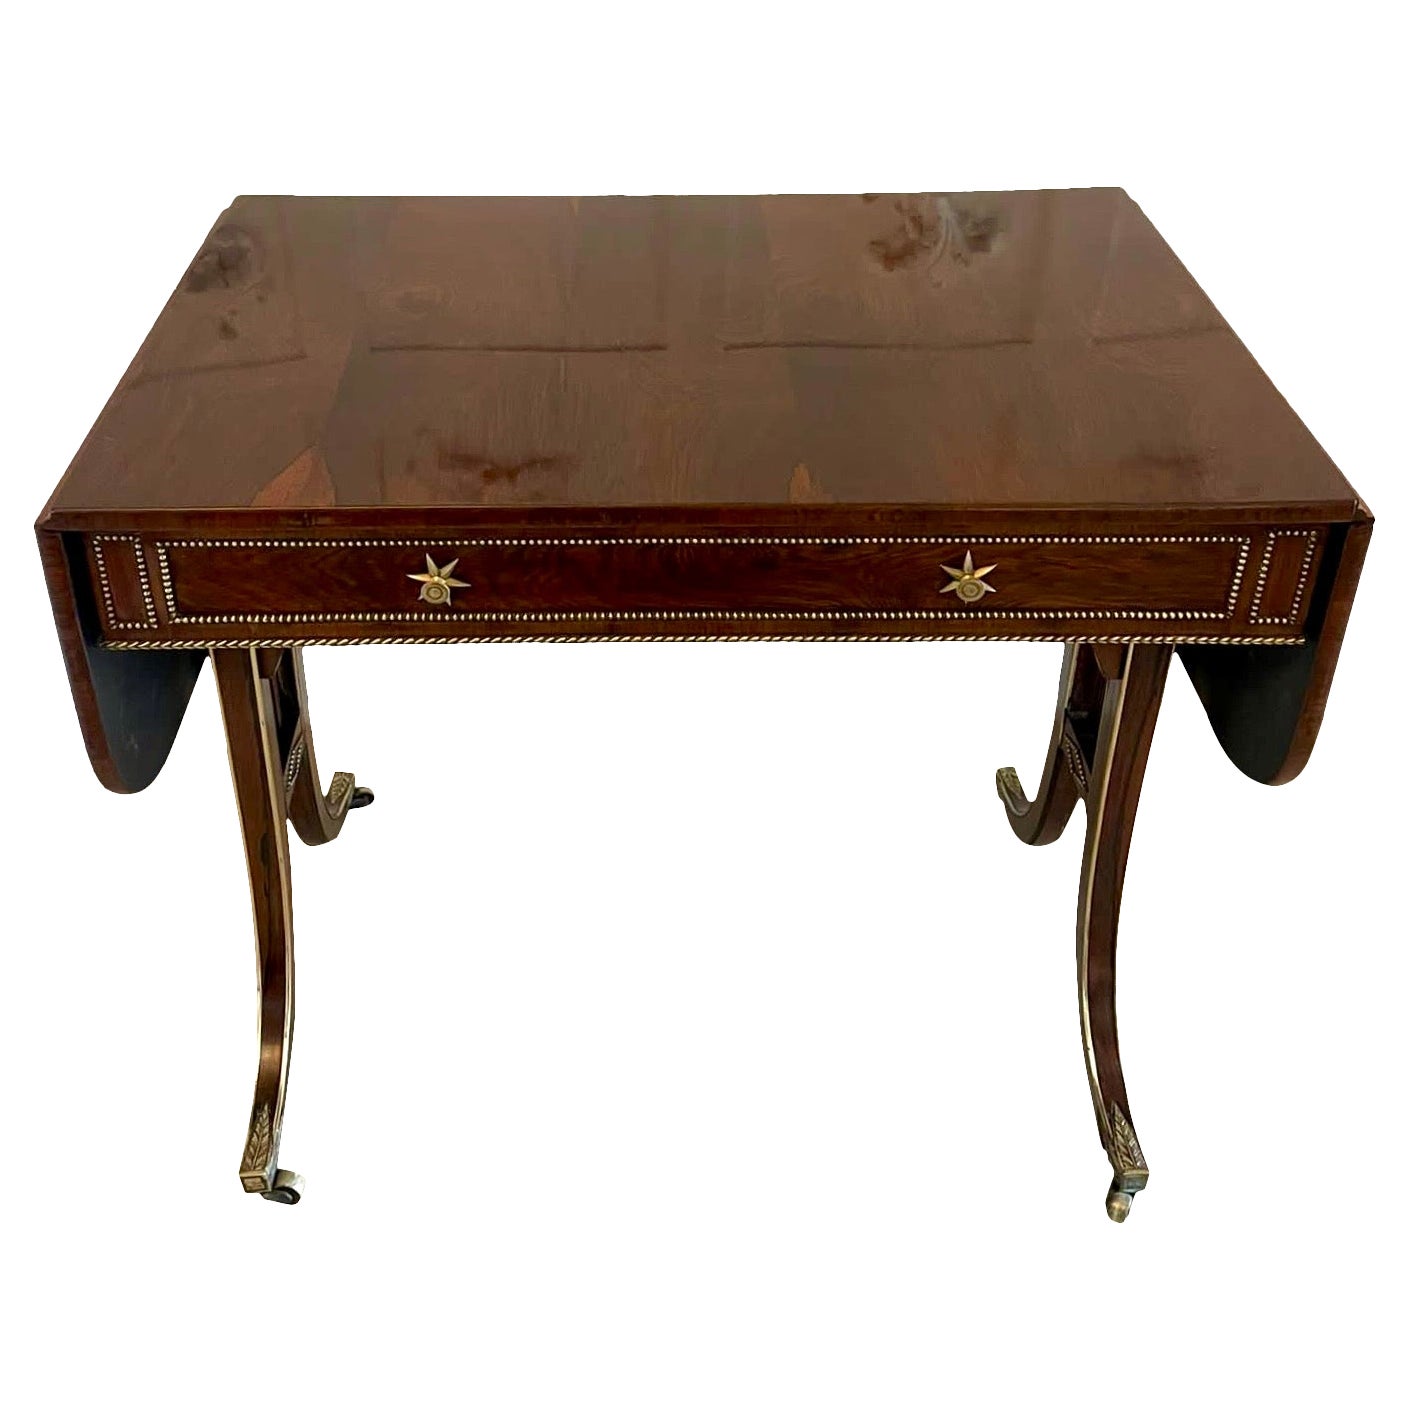 Fine Quality Antique Regency Brass Inlaid Rosewood Freestanding Sofa/Side Table For Sale